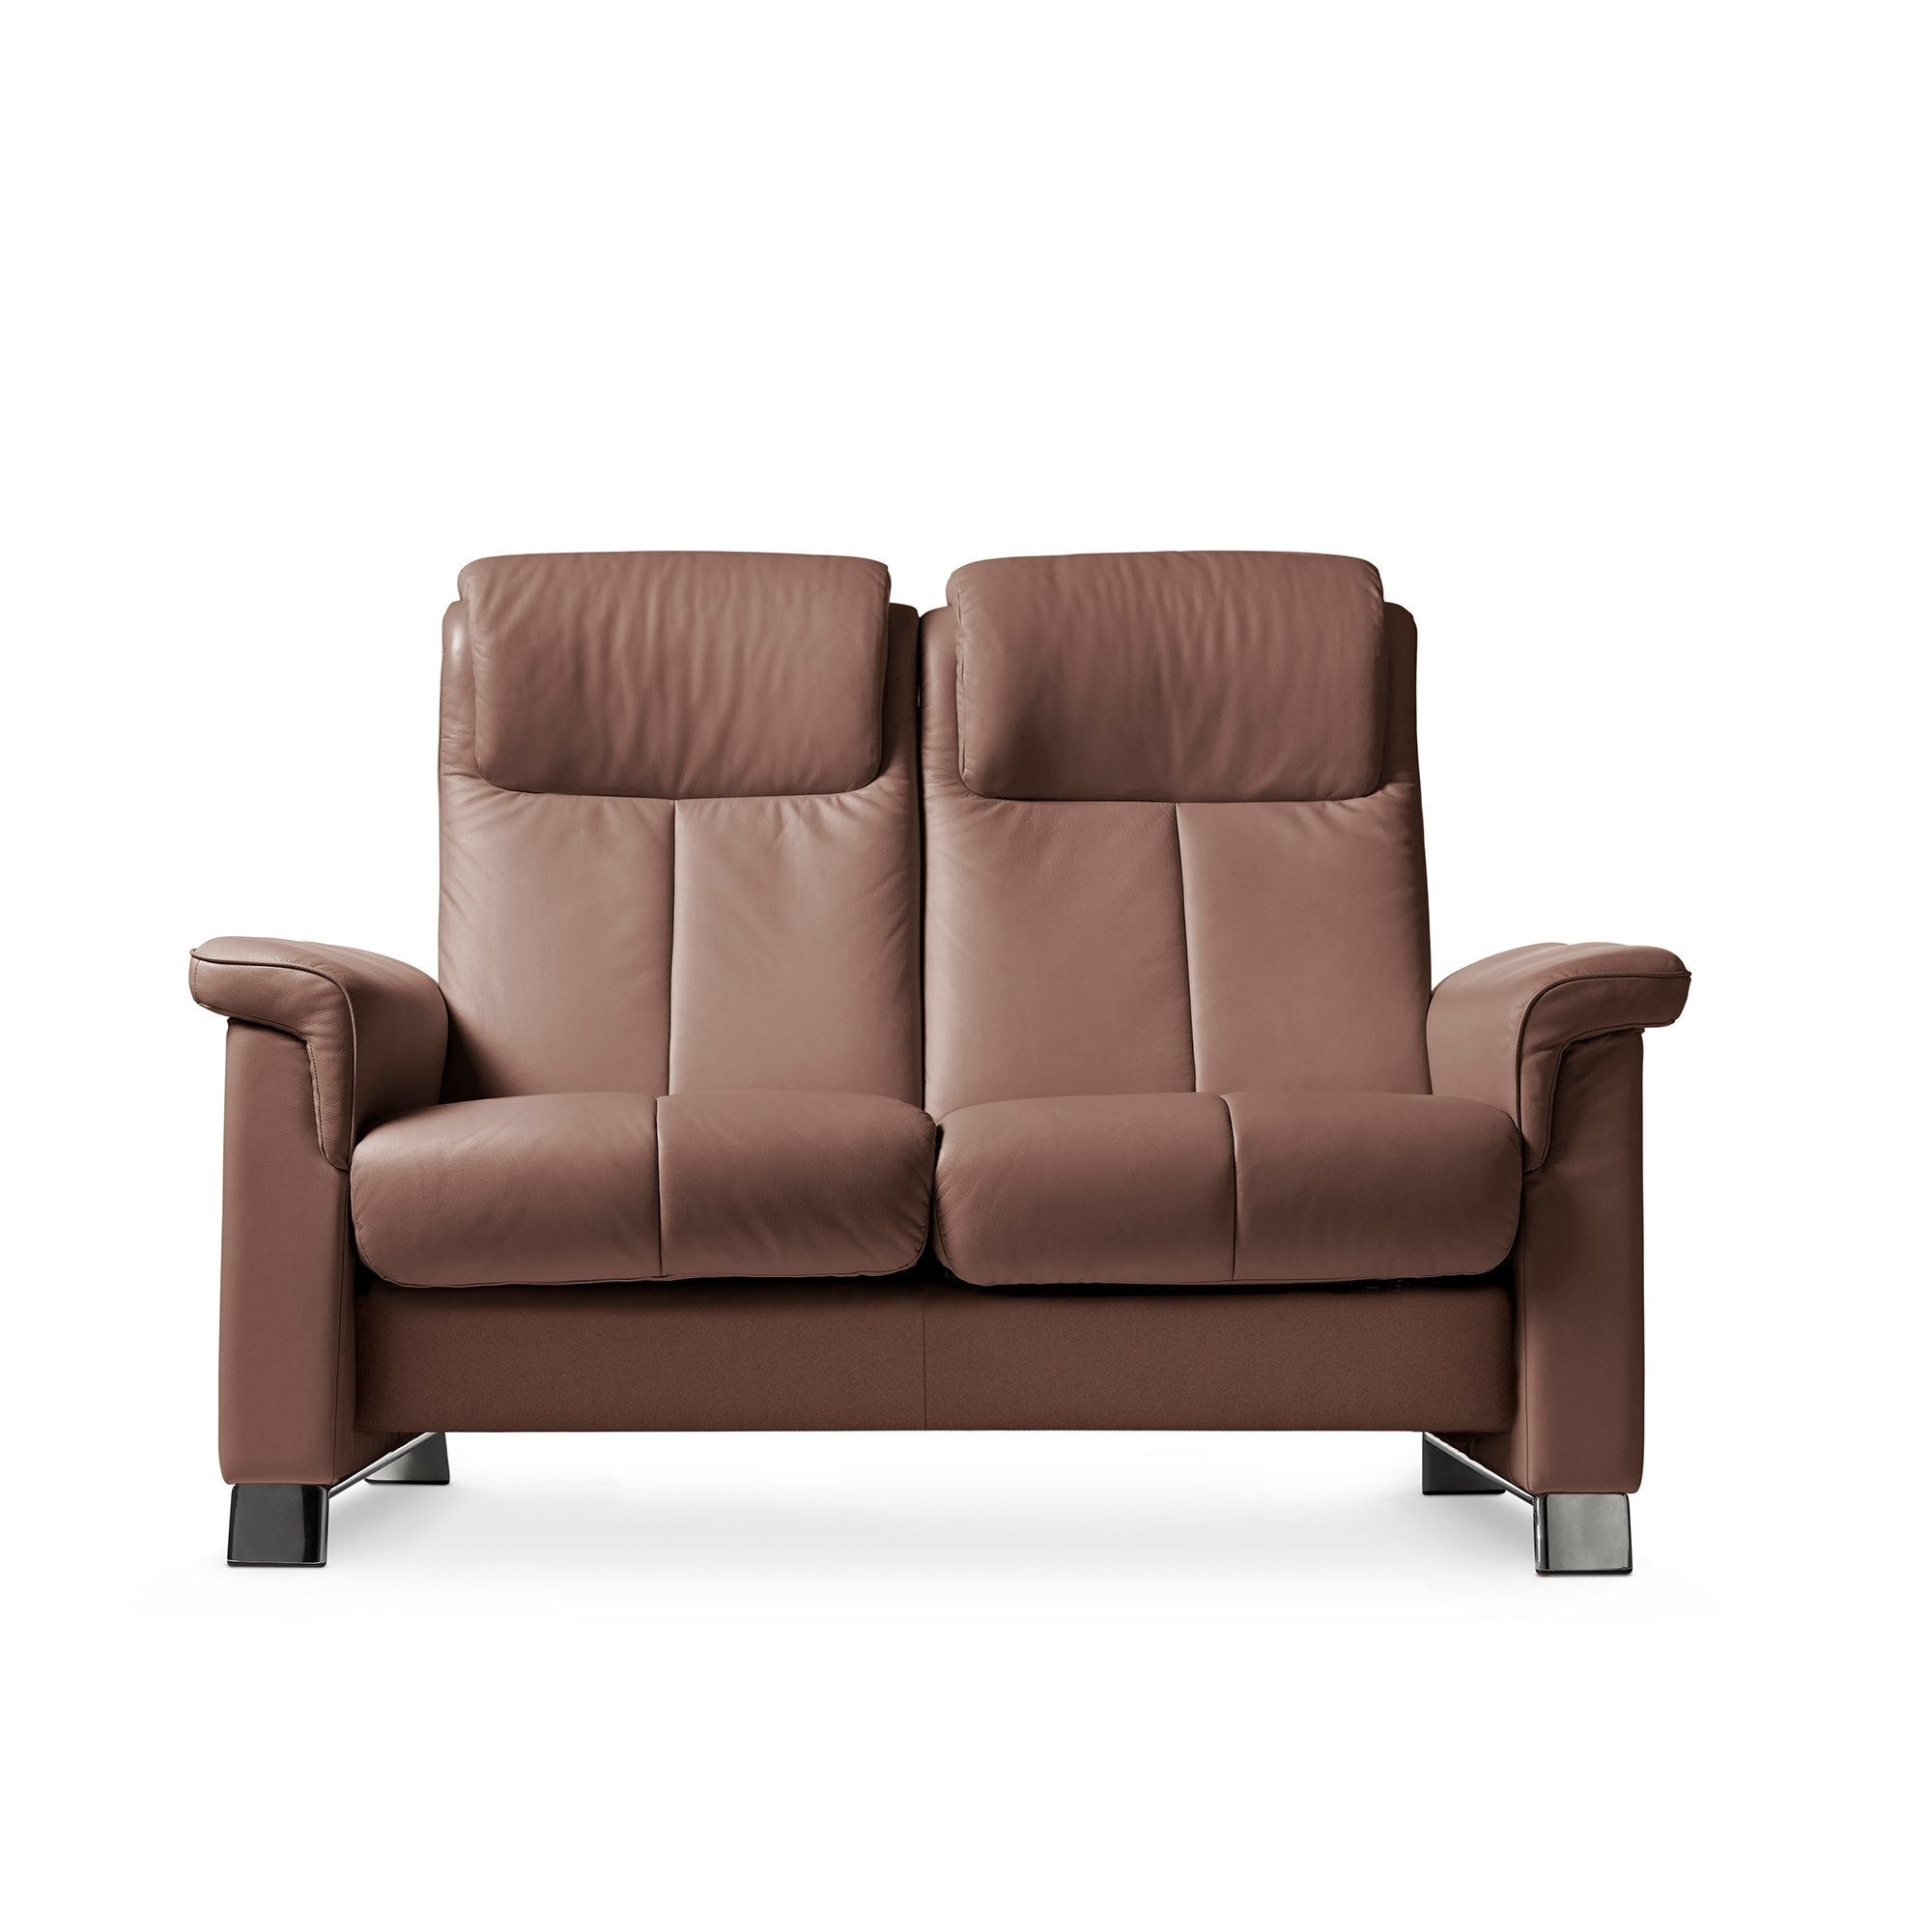 Stressless Breeze 2 Seater Sofa Stressless Cookes Furniture 